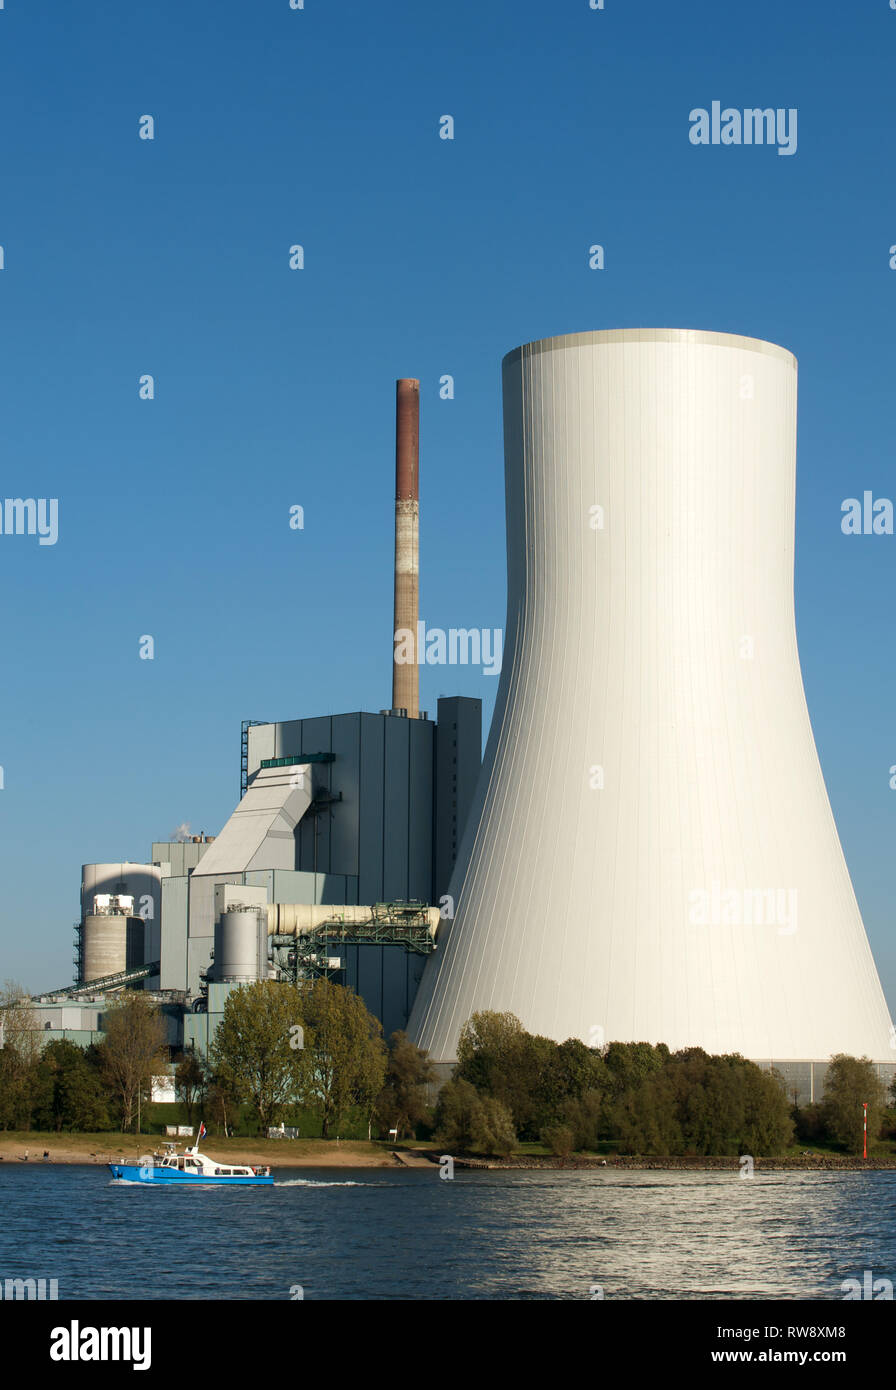 Walsum coal-fired power station owned by Evonik Industries. Duisburg, Germany. Stock Photo